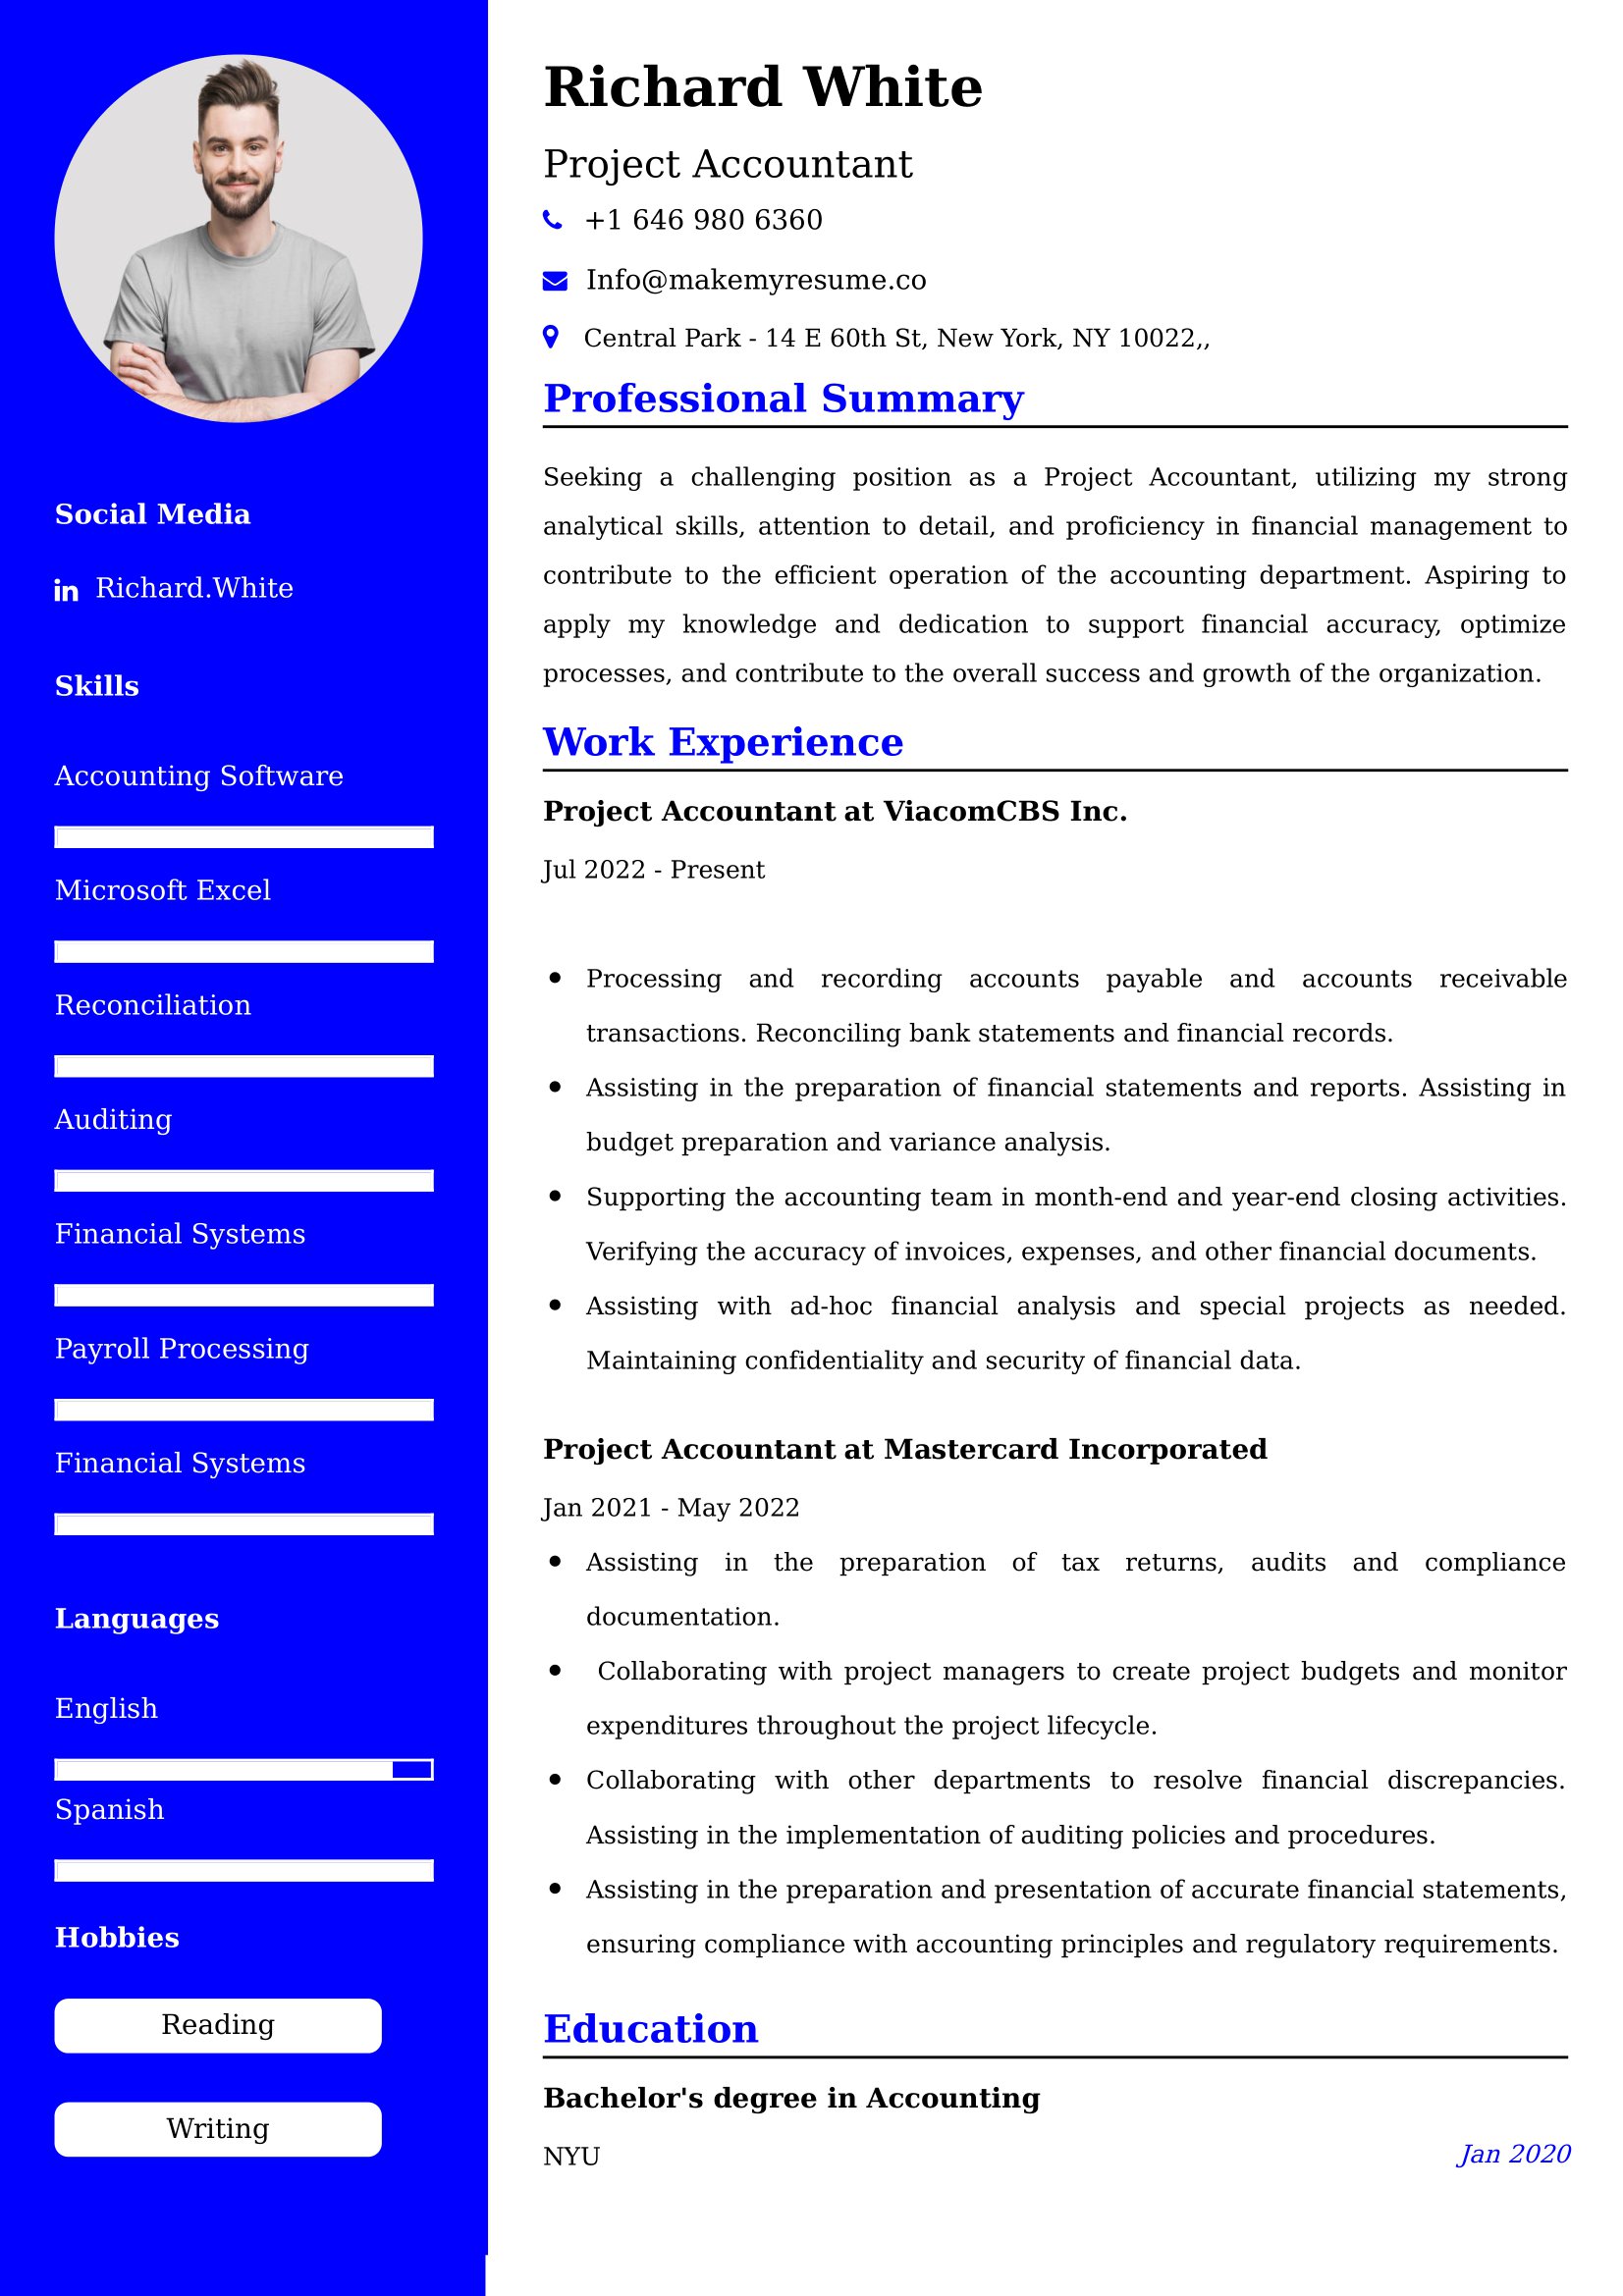 Project Accountant Resume Examples - Canadian Format and Tips